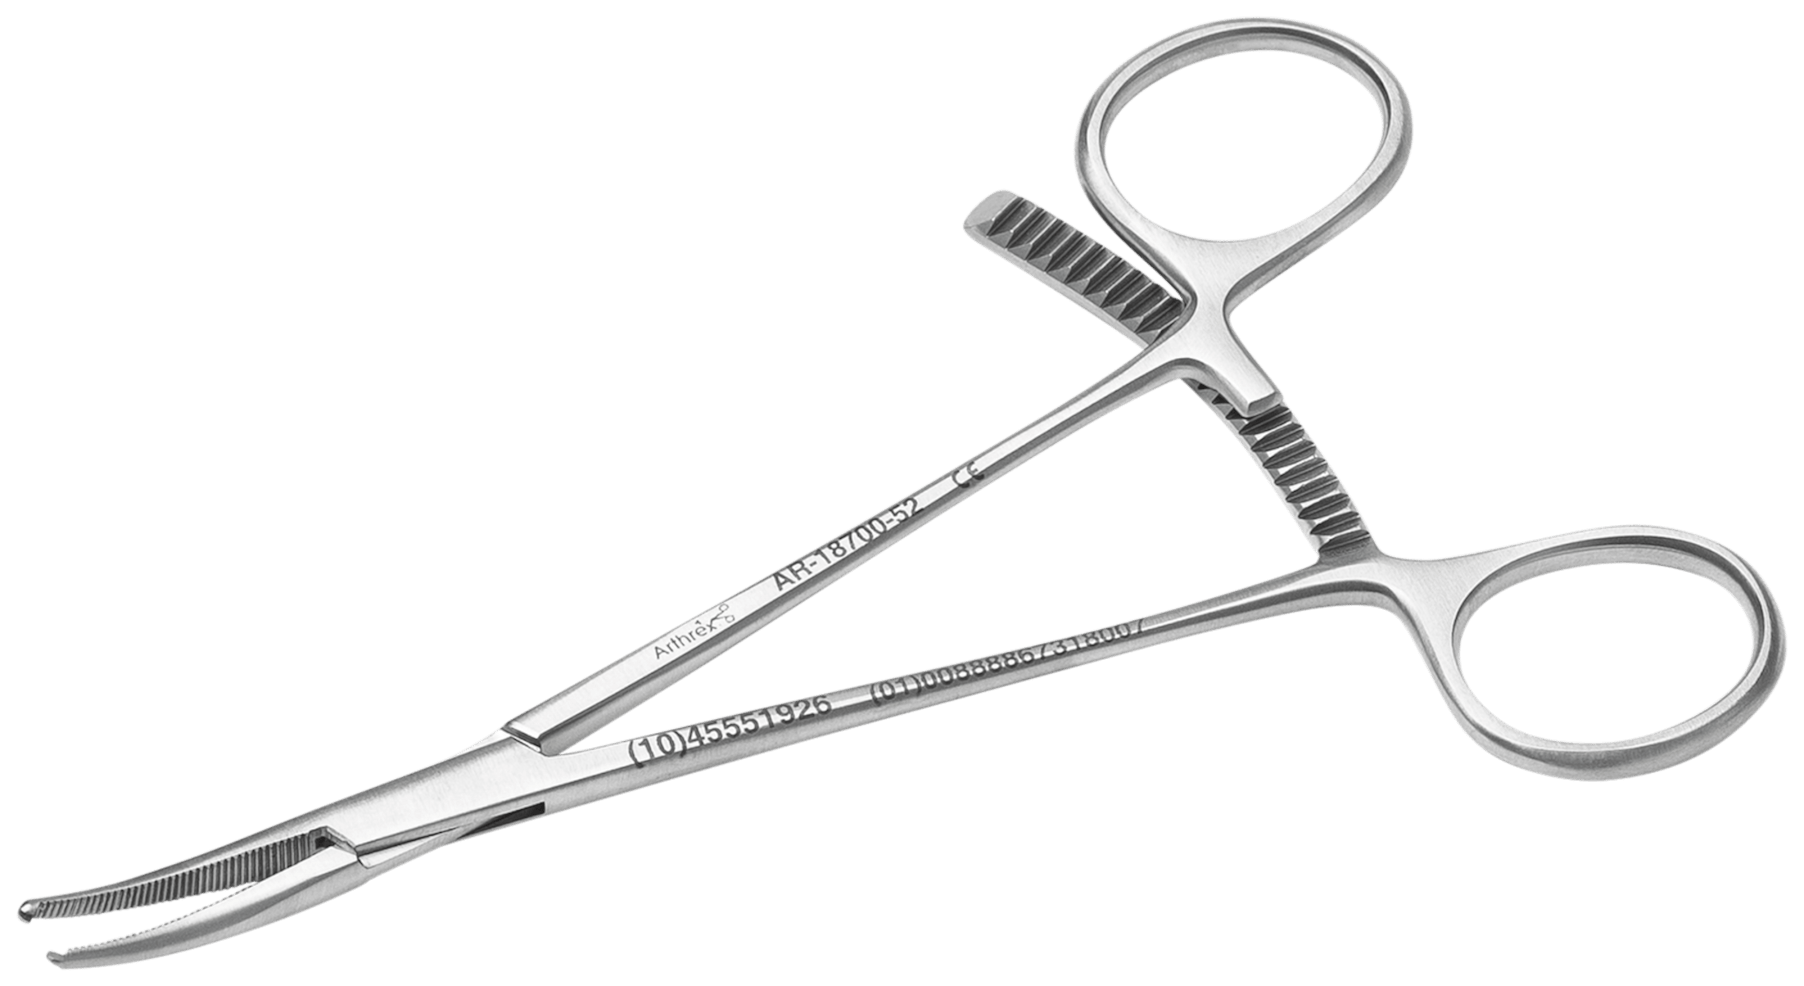 Toothed Reduction Forceps (Kocher)